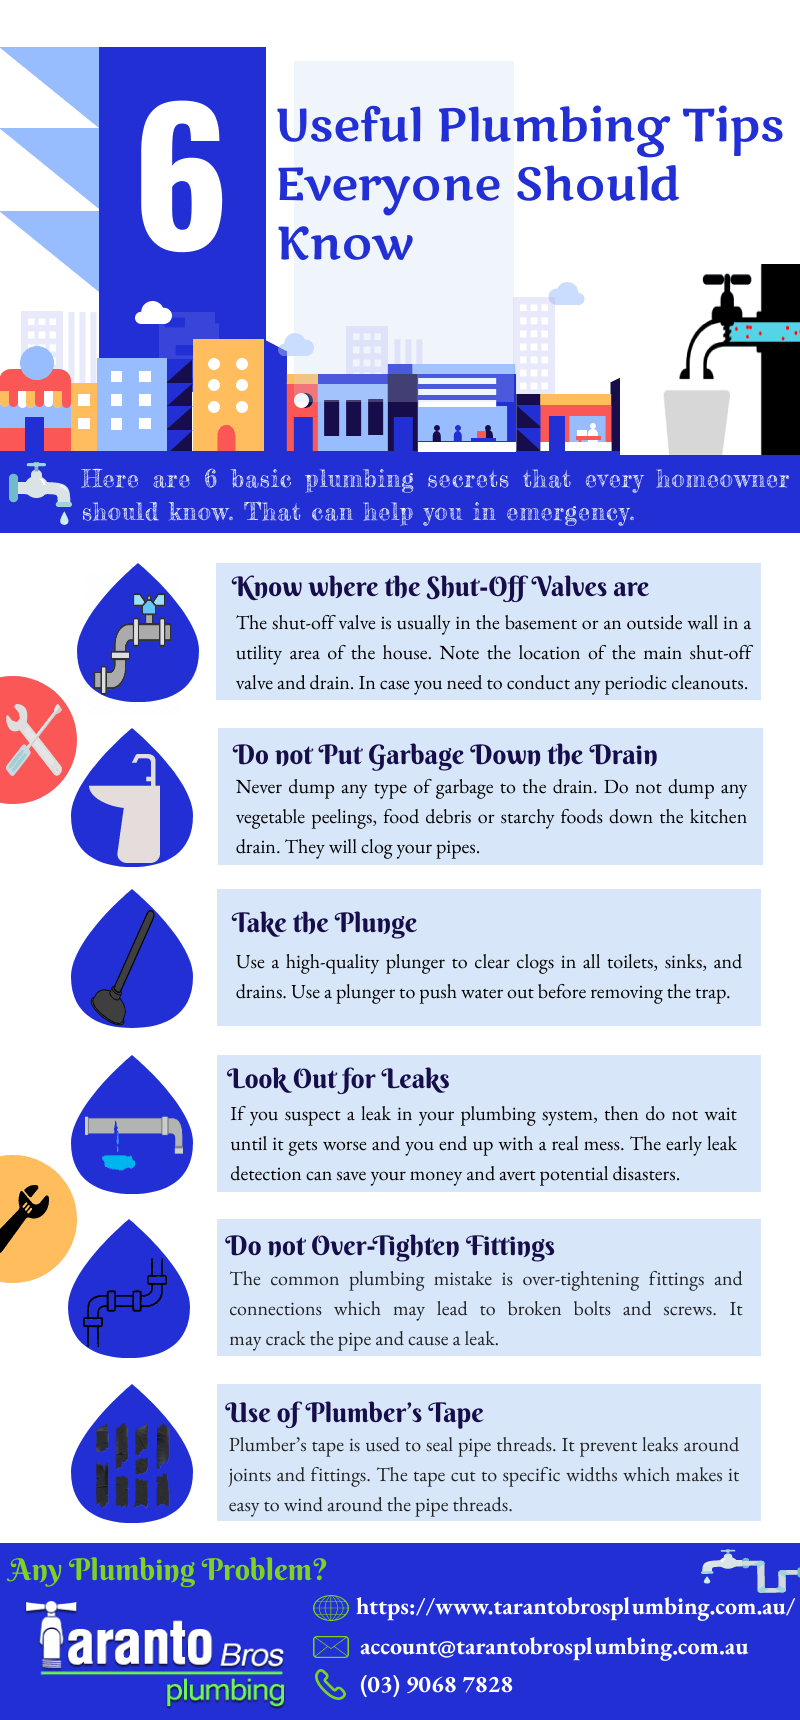 6 Useful Plumbing Tips Everyone Should Know Infographic